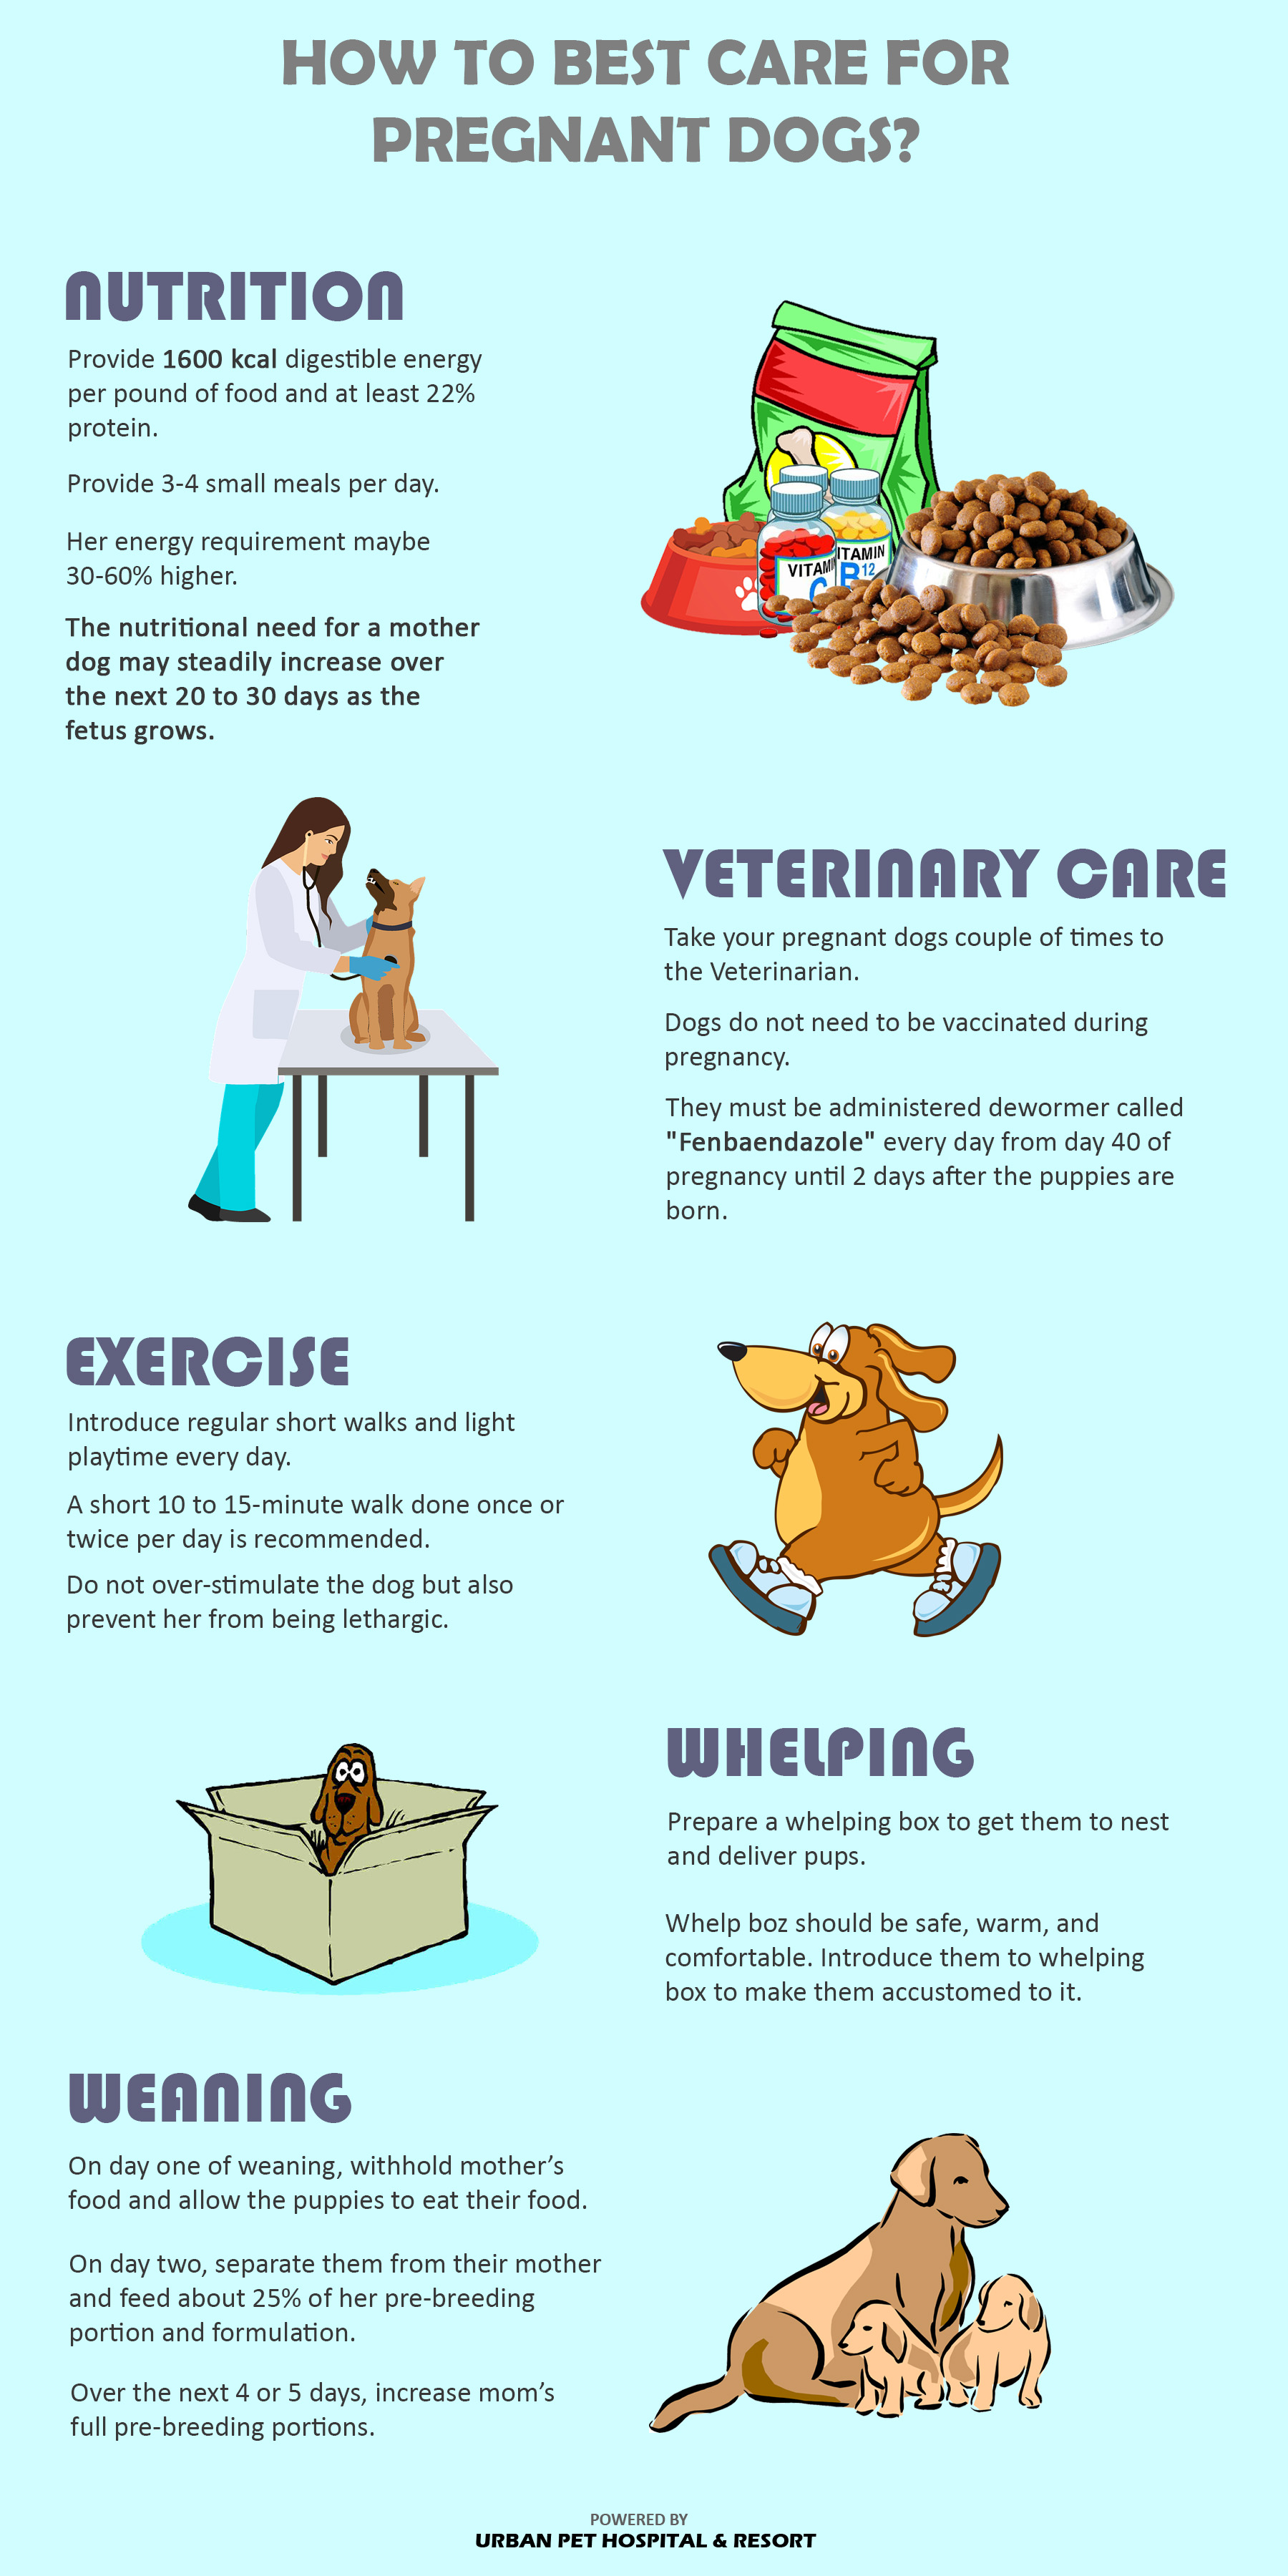 I. Introduction to Caring for Pregnant Dogs and Assisting Whelping